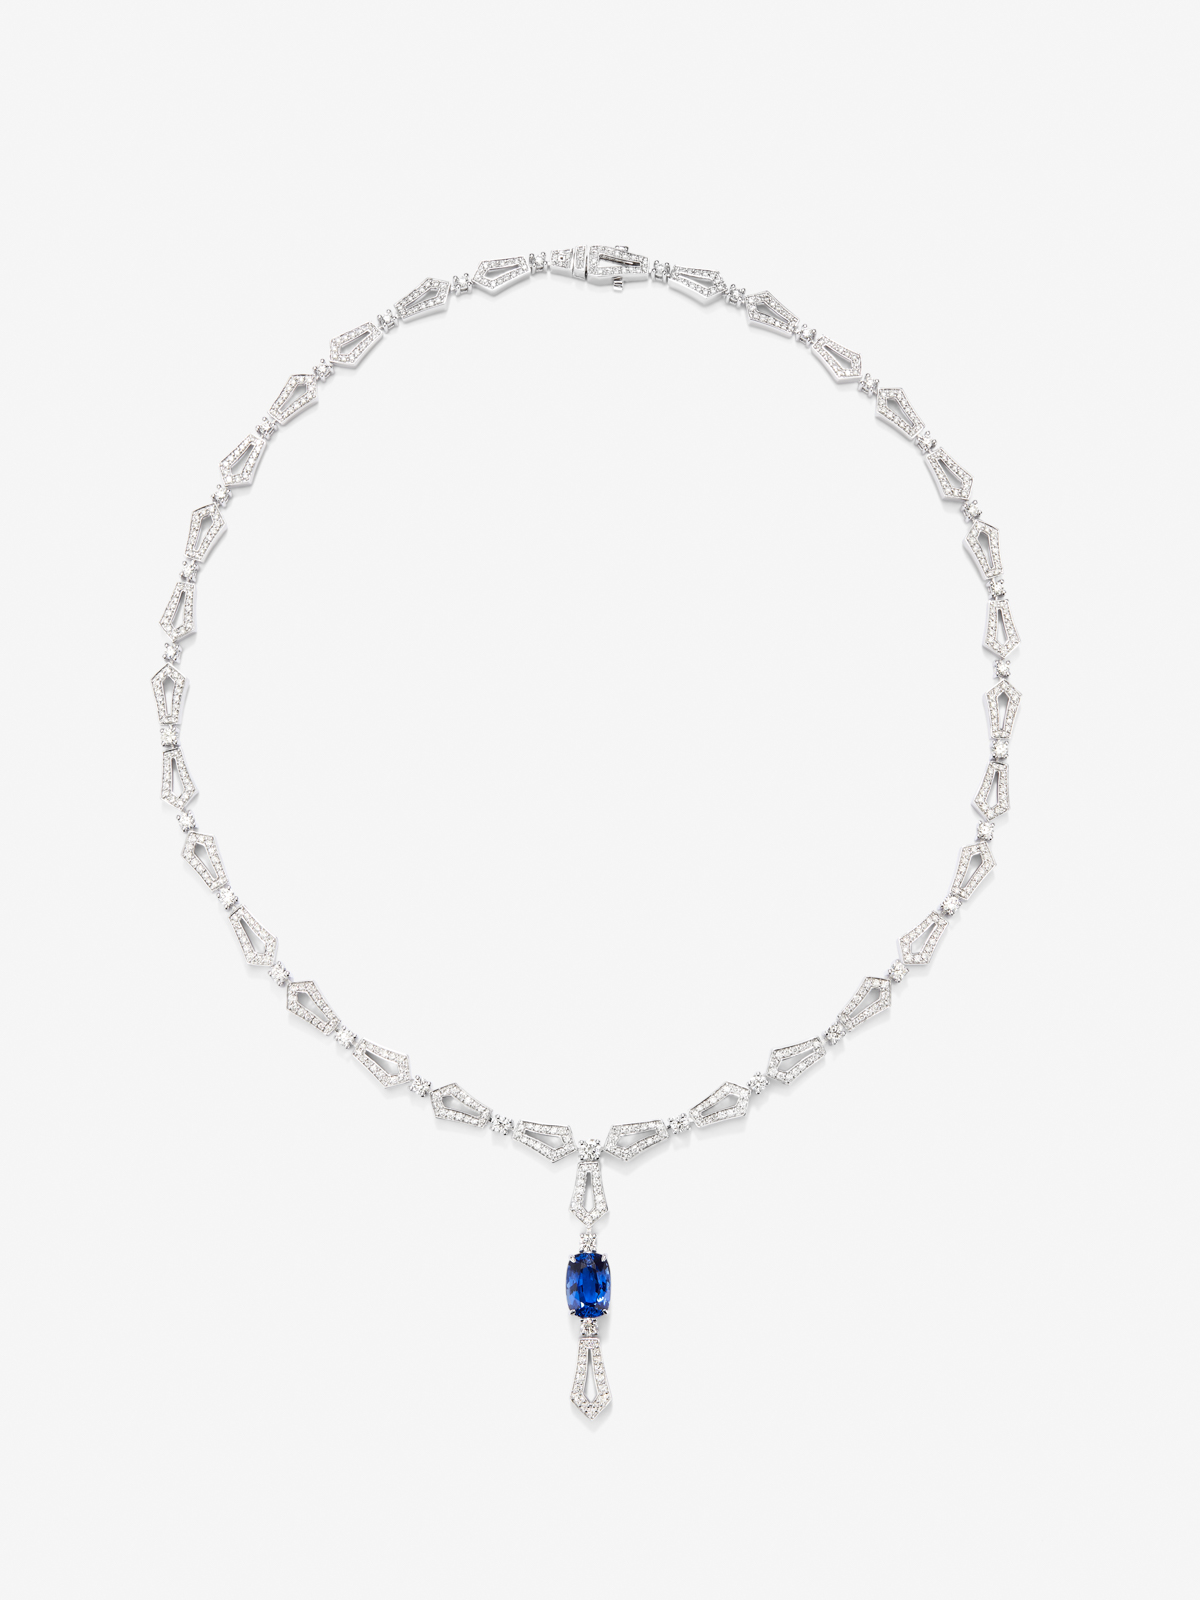 18K white gold necklace with blue sapphire in 3.17 cts and white diamonds in bright 4.13 cts diamonds